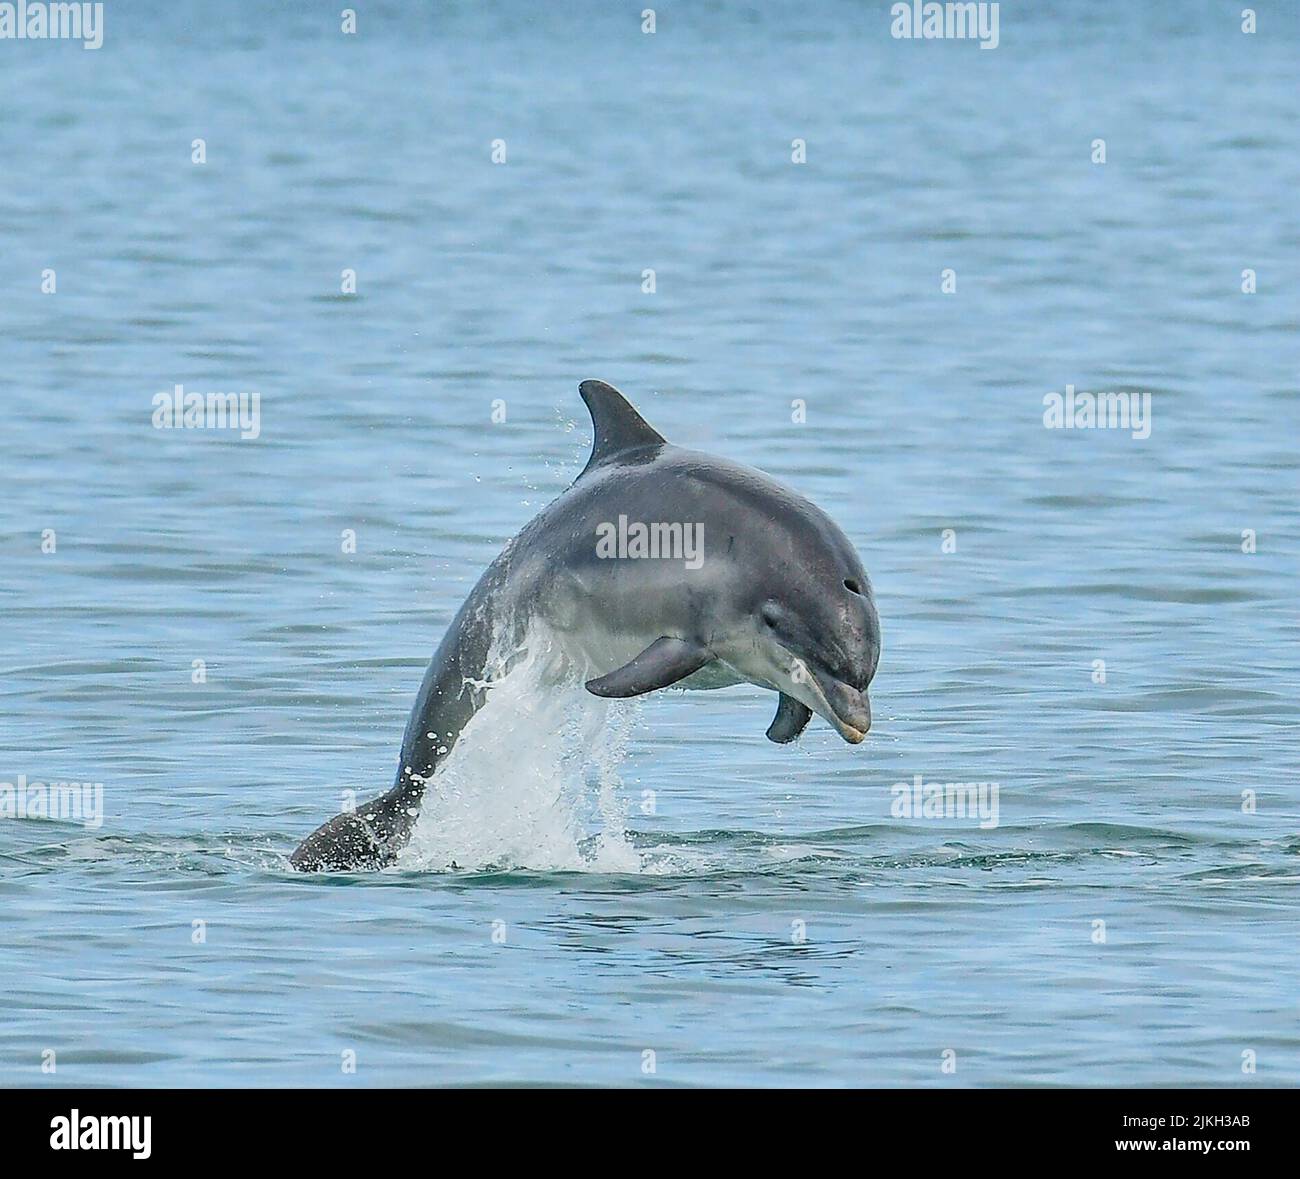 A mother dolphin jumps over her young calf as she teachers her to jump. Wales, UK: STUNNING IMAGES show a mother dolphin training her baby by jumping Stock Photo